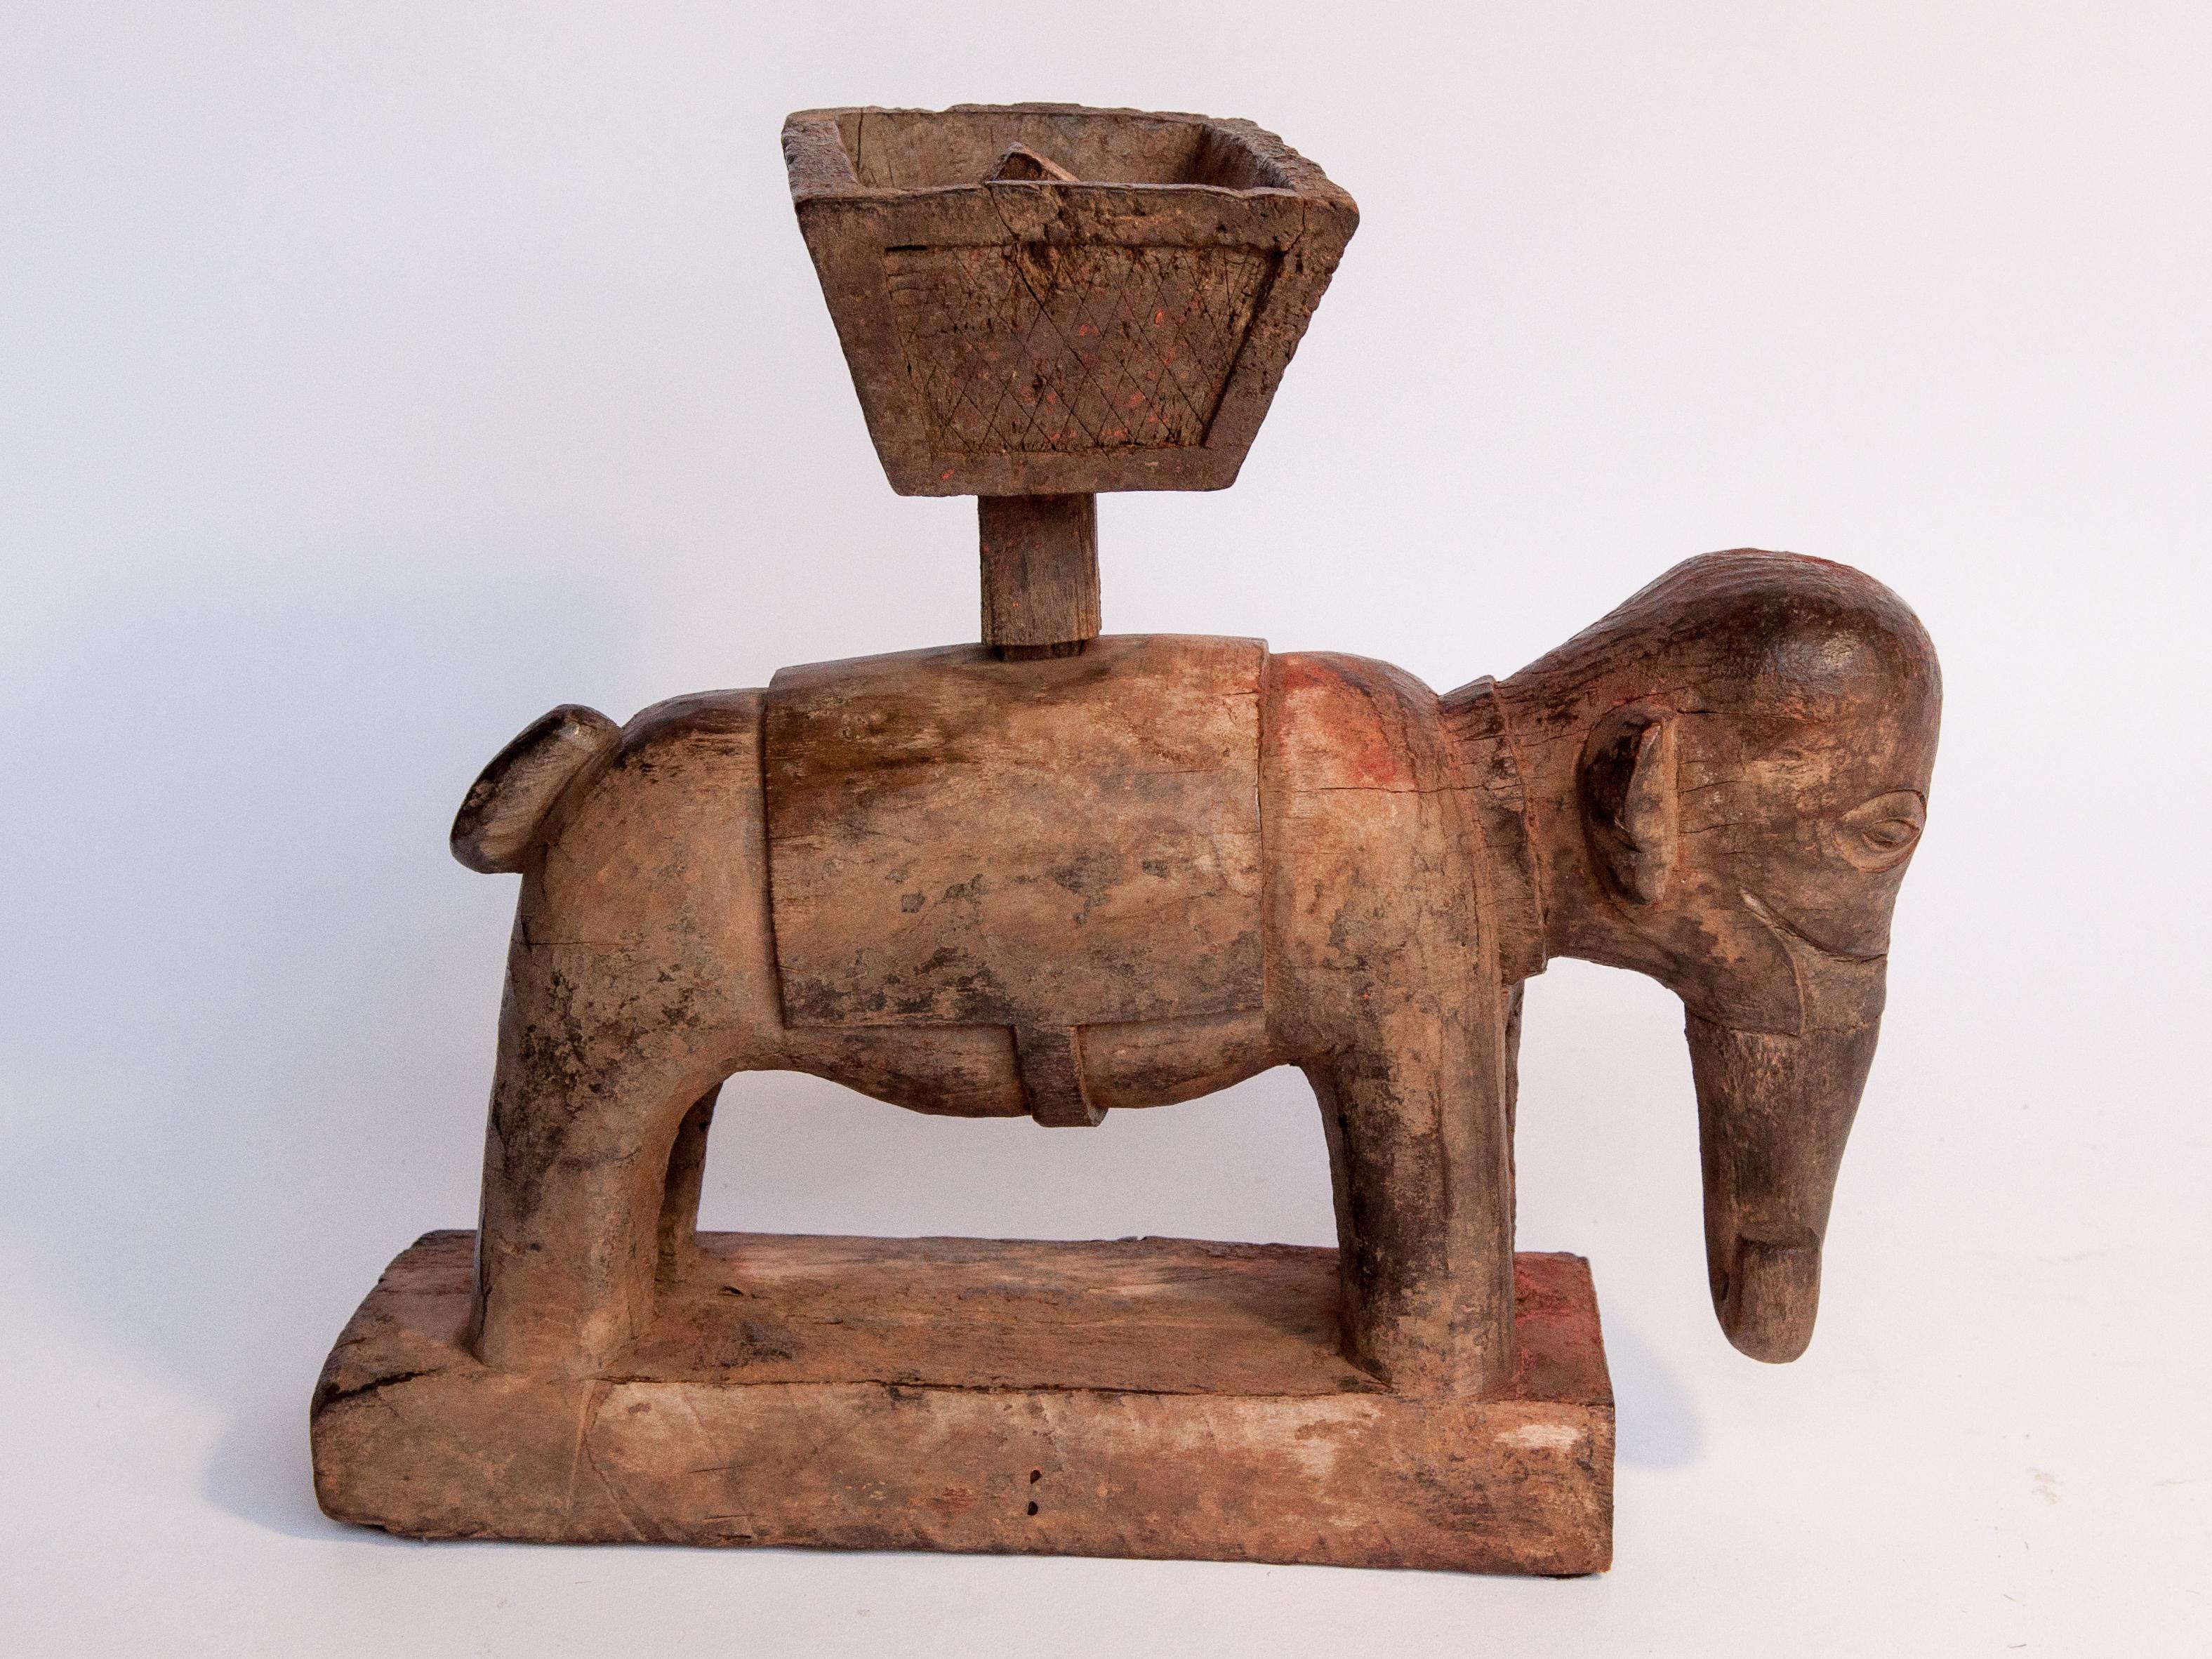 Vintage wooden offering holder elephant motif Newar of Nepal. Mid 20th Century.
This carved wooden elephant was placed in front of a household shrine to hold offerings of rice, flowers or other small objects, made to the Deity. Such holders are